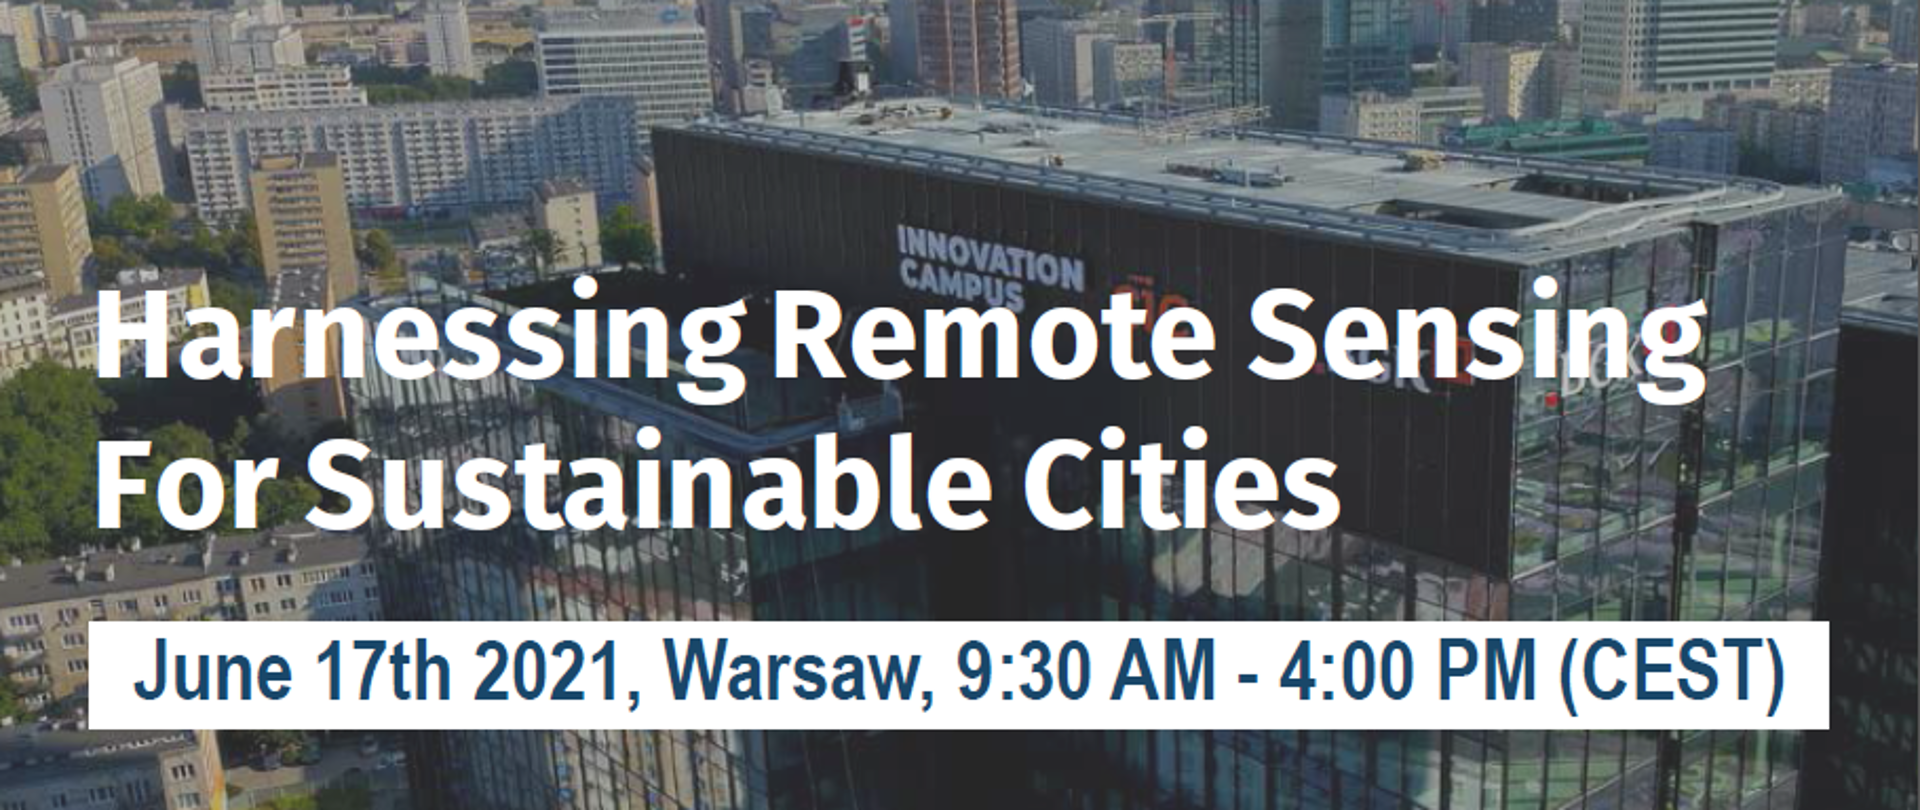 Harnessing Remote Sensing for Sustainable Cities - event in Warsaw, Data Forum